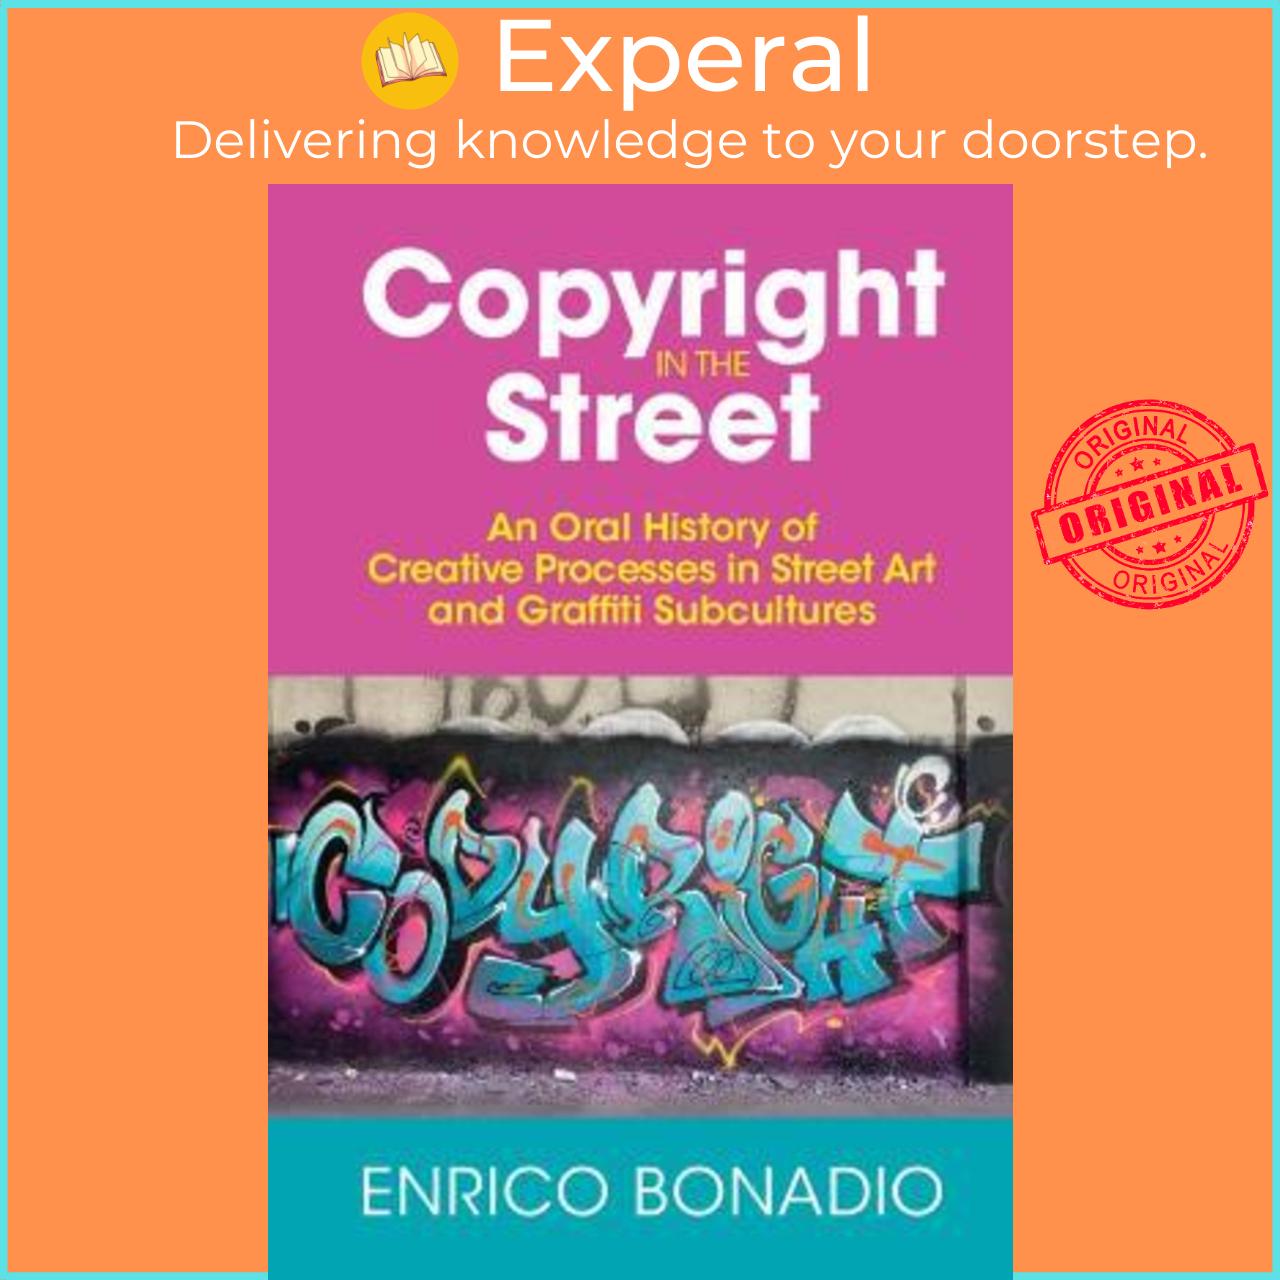 Hình ảnh Sách - Copyright in the Street : An Oral History of Creative Processes in Stre by Enrico Bonadio (UK edition, hardcover)